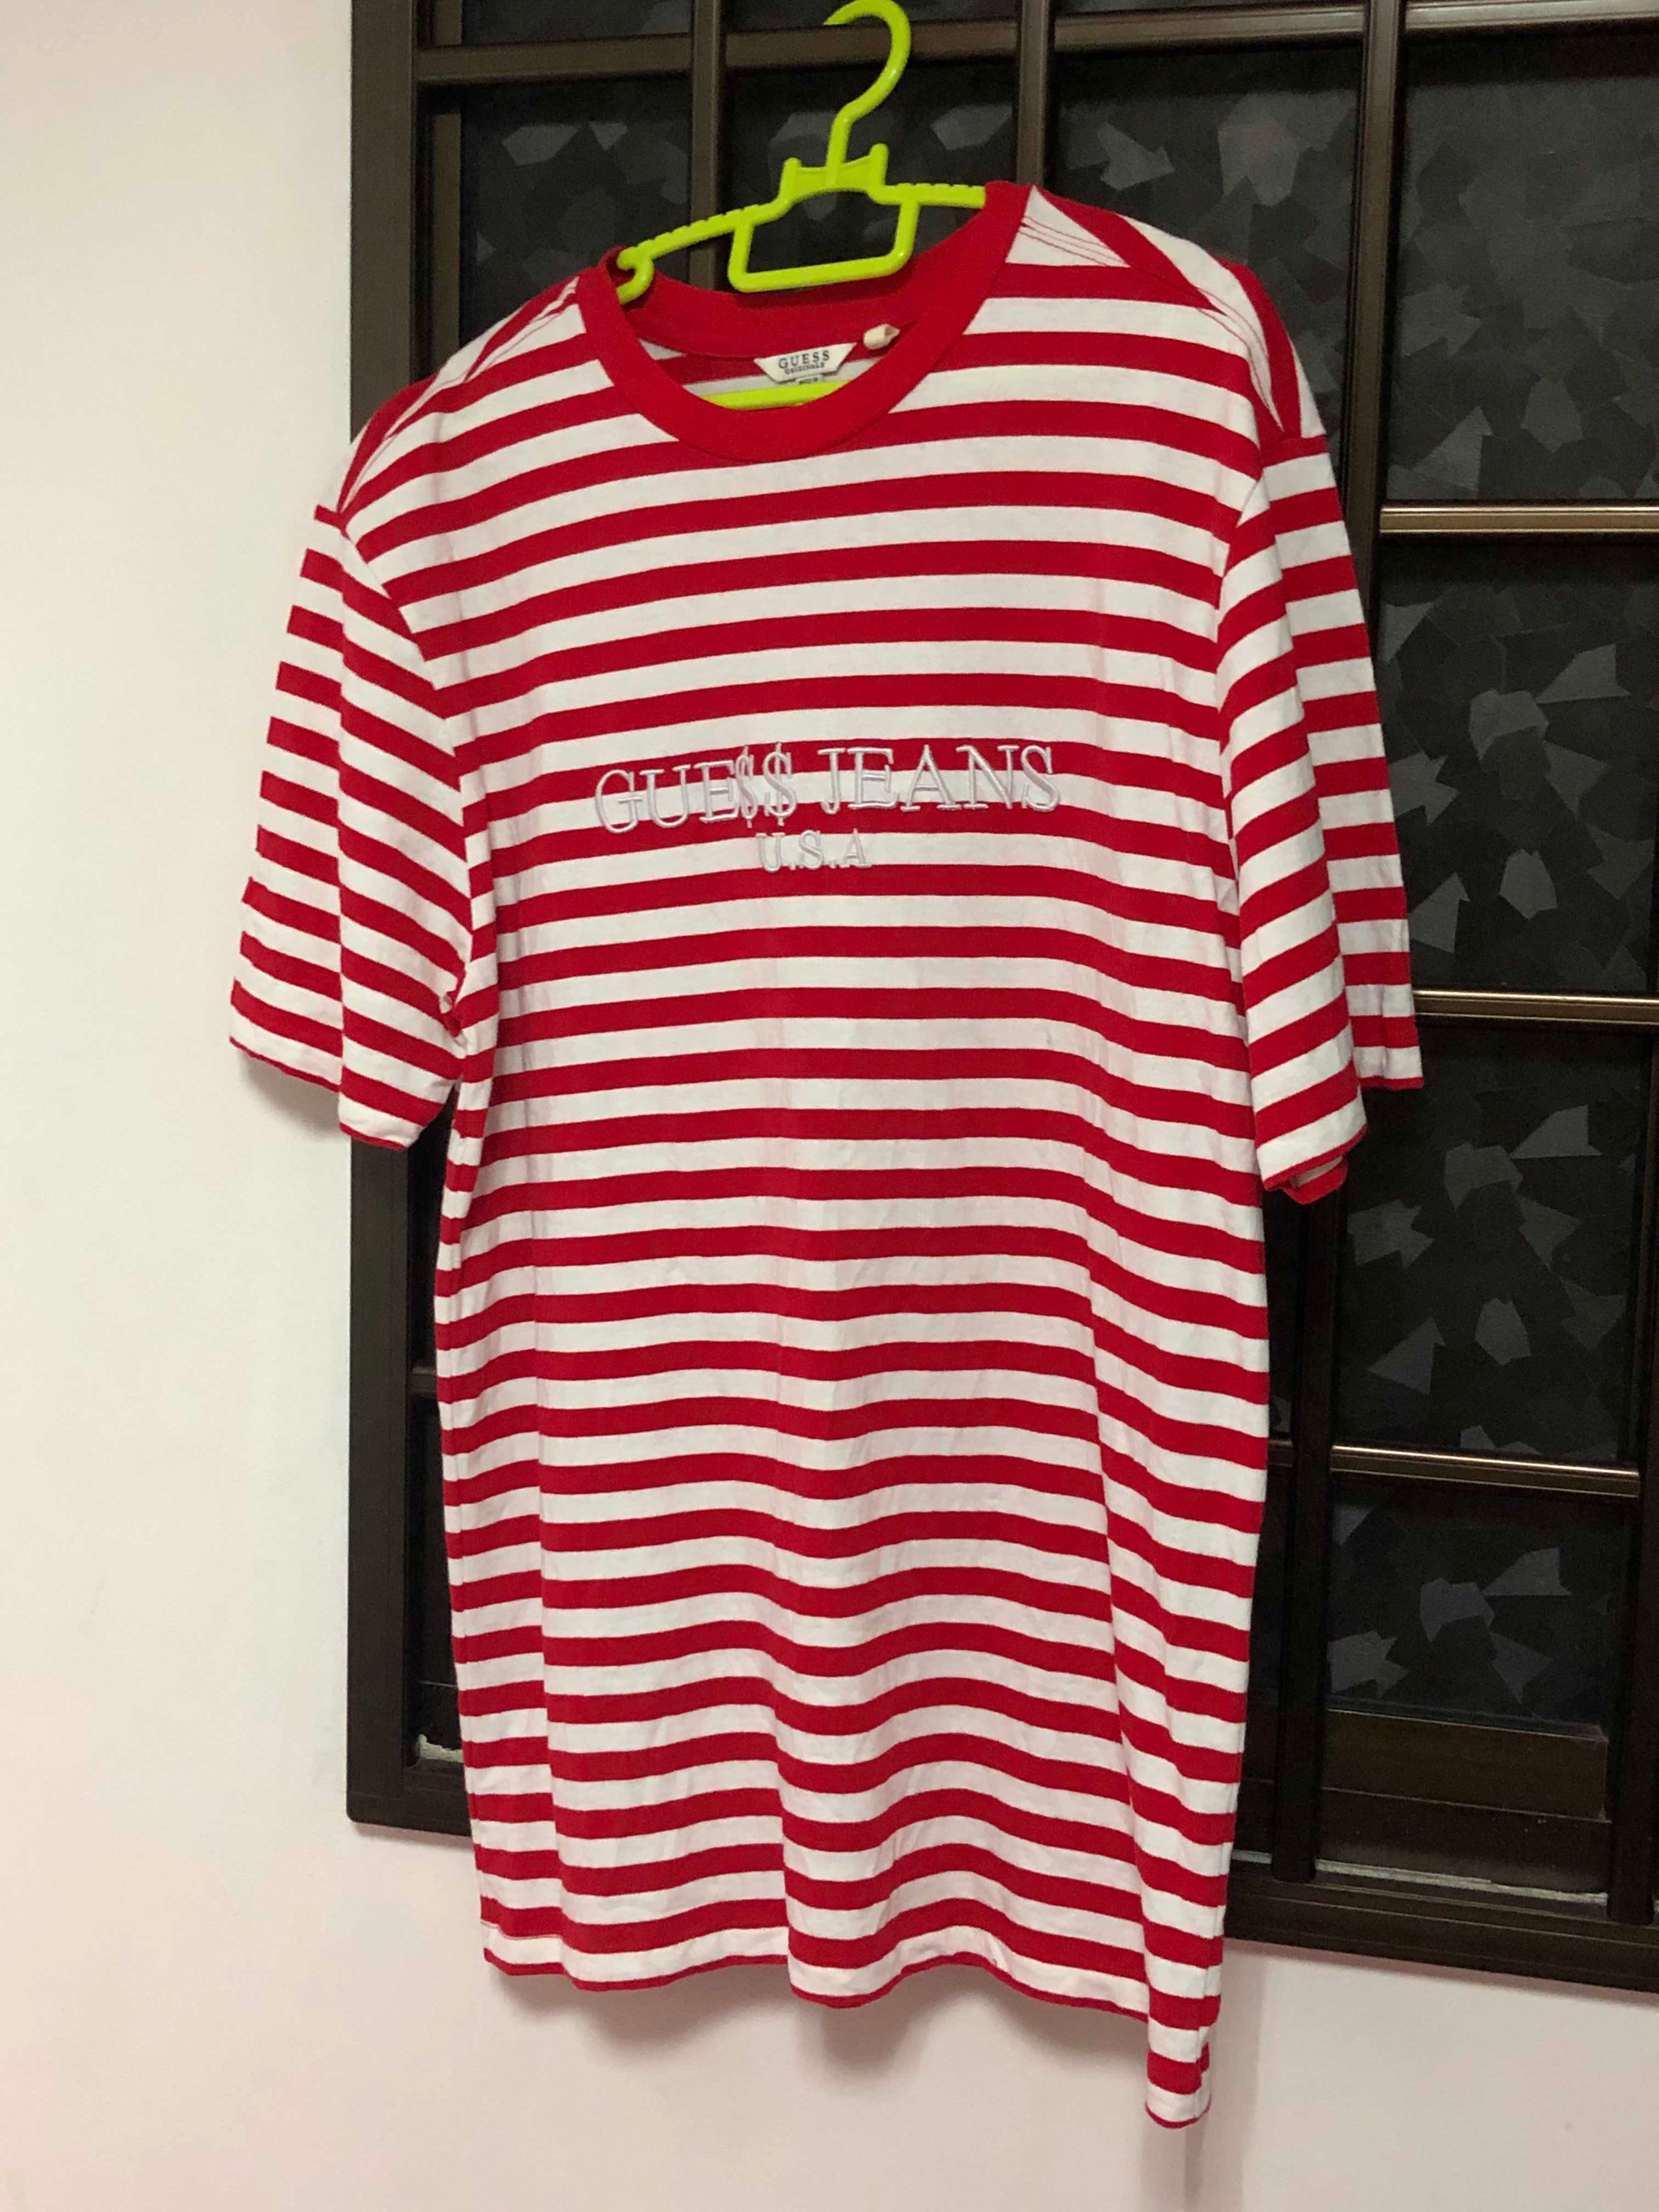 GUESS ASAP ROCKY RED WHITE TEE, Men's Fashion, & Sets, & Polo Shirts on Carousell